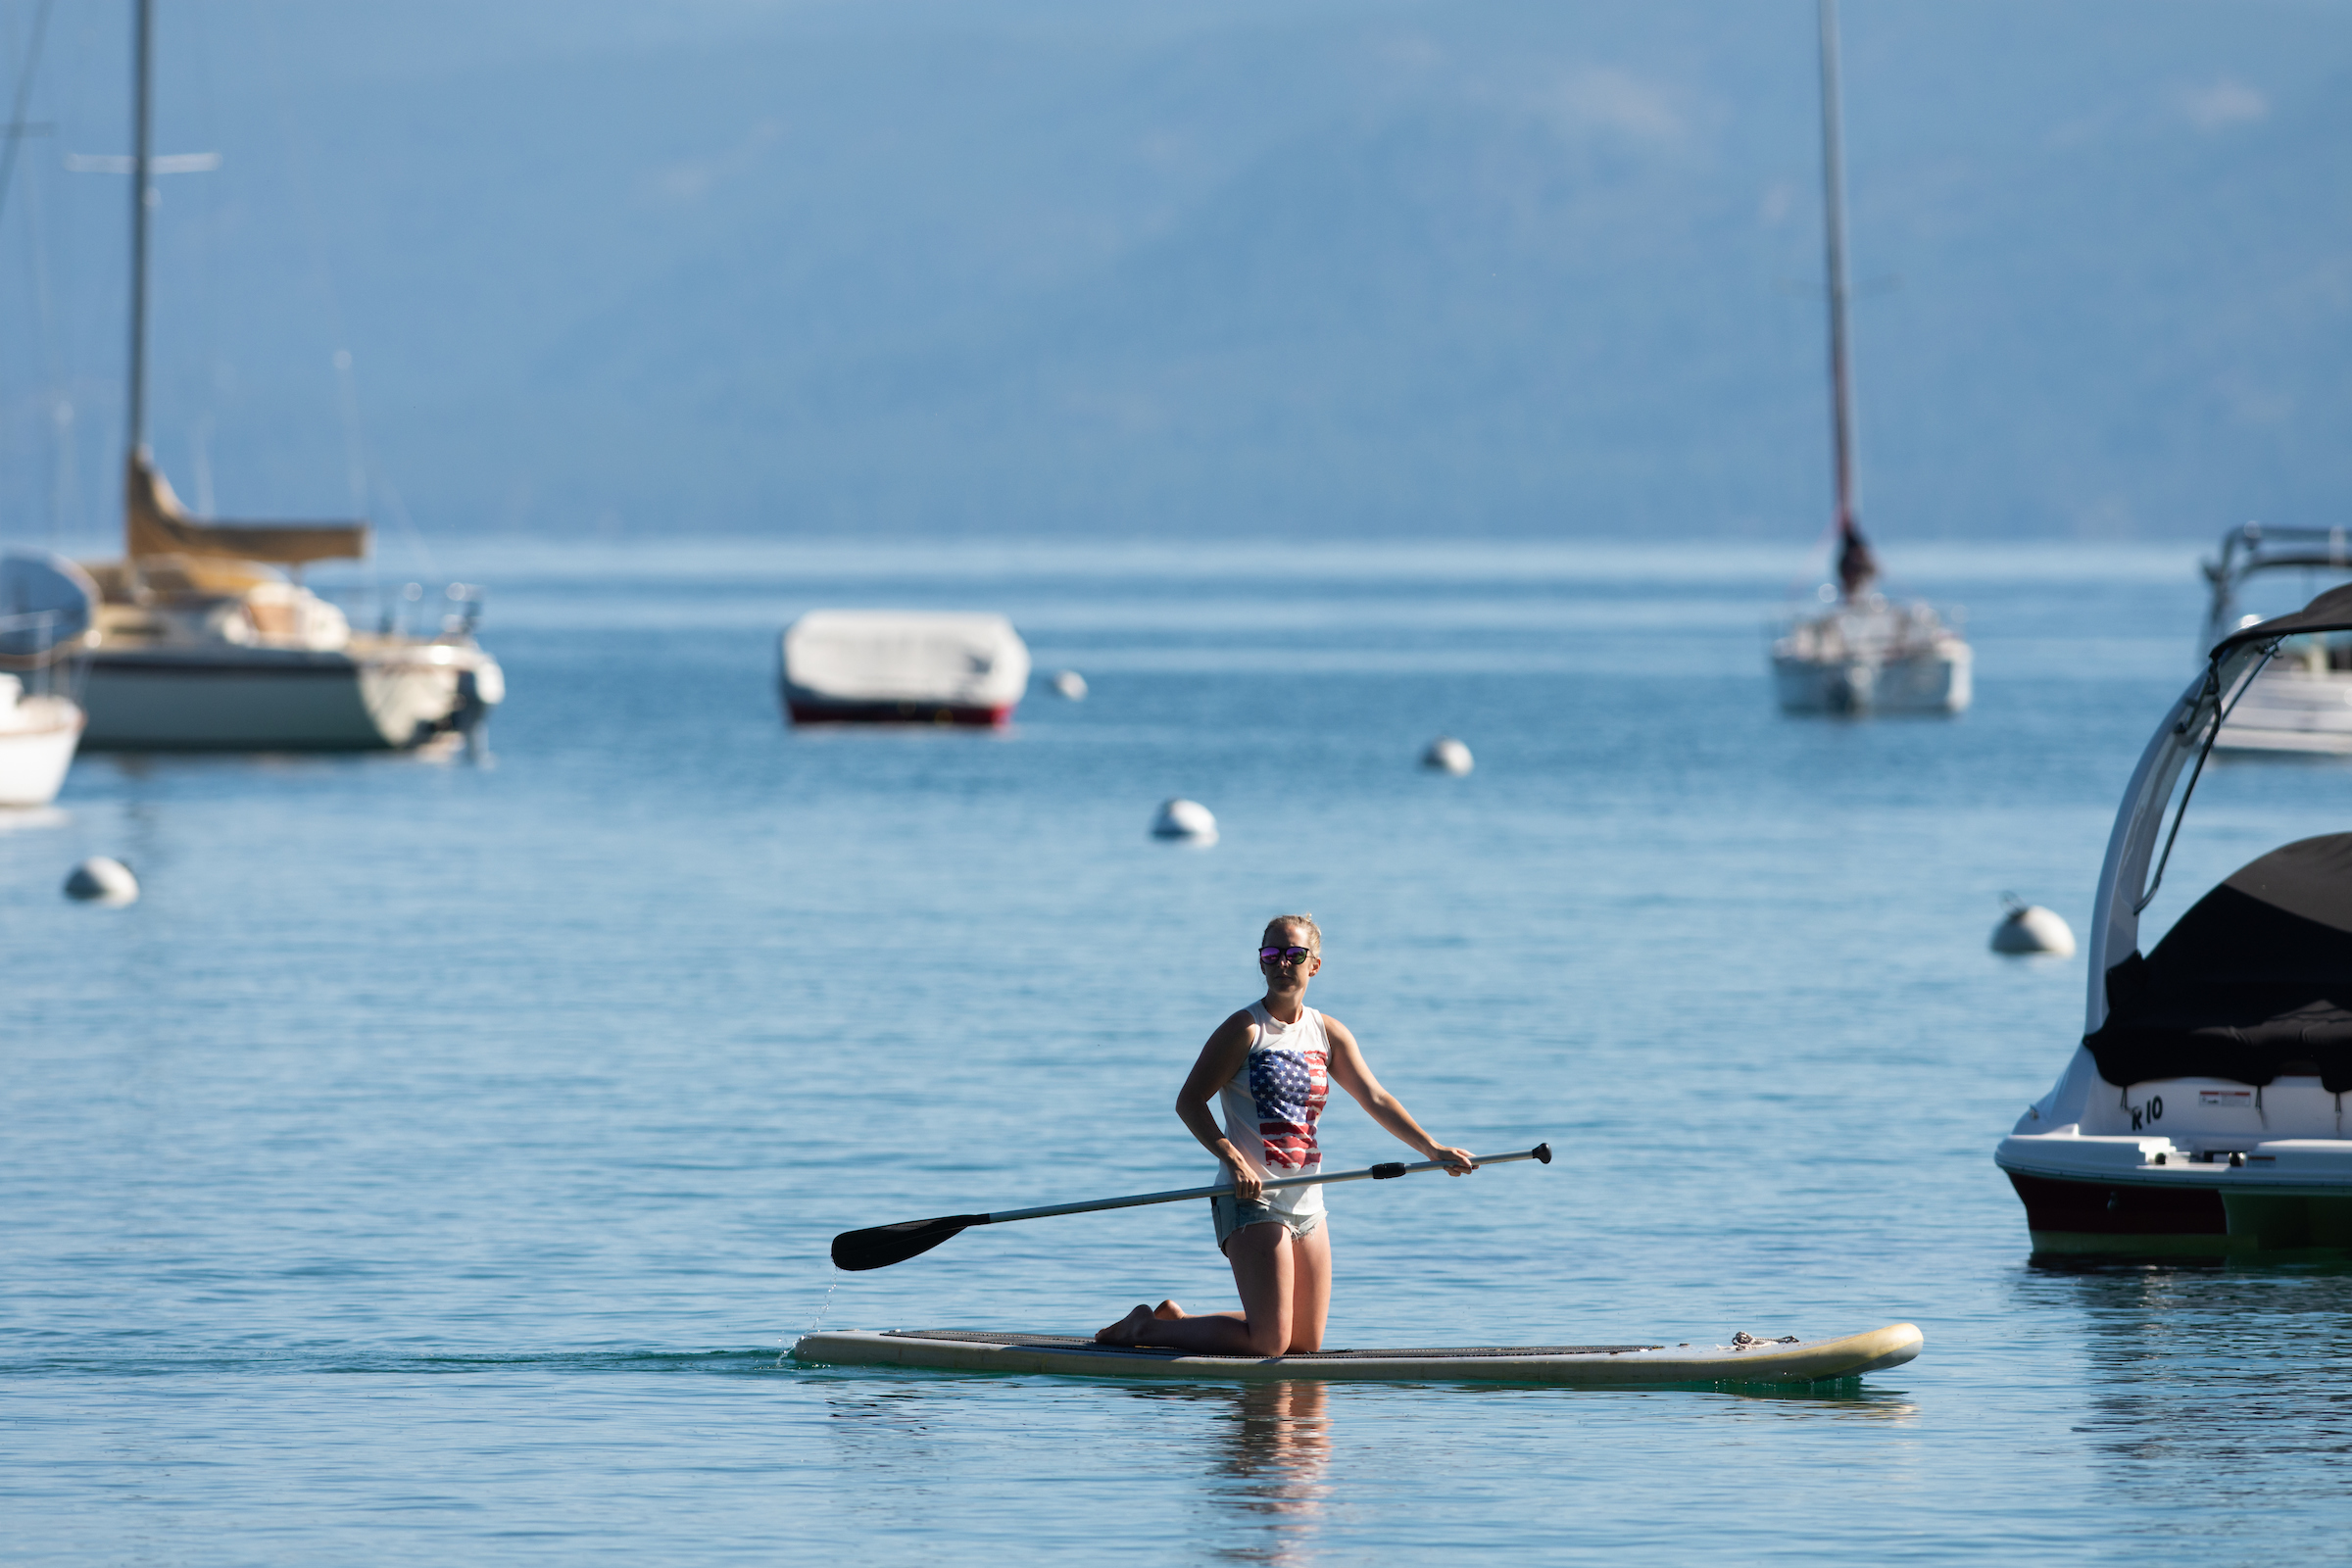 A kneeling paddle boarder in Lake Tahoe with a sailboat in the background